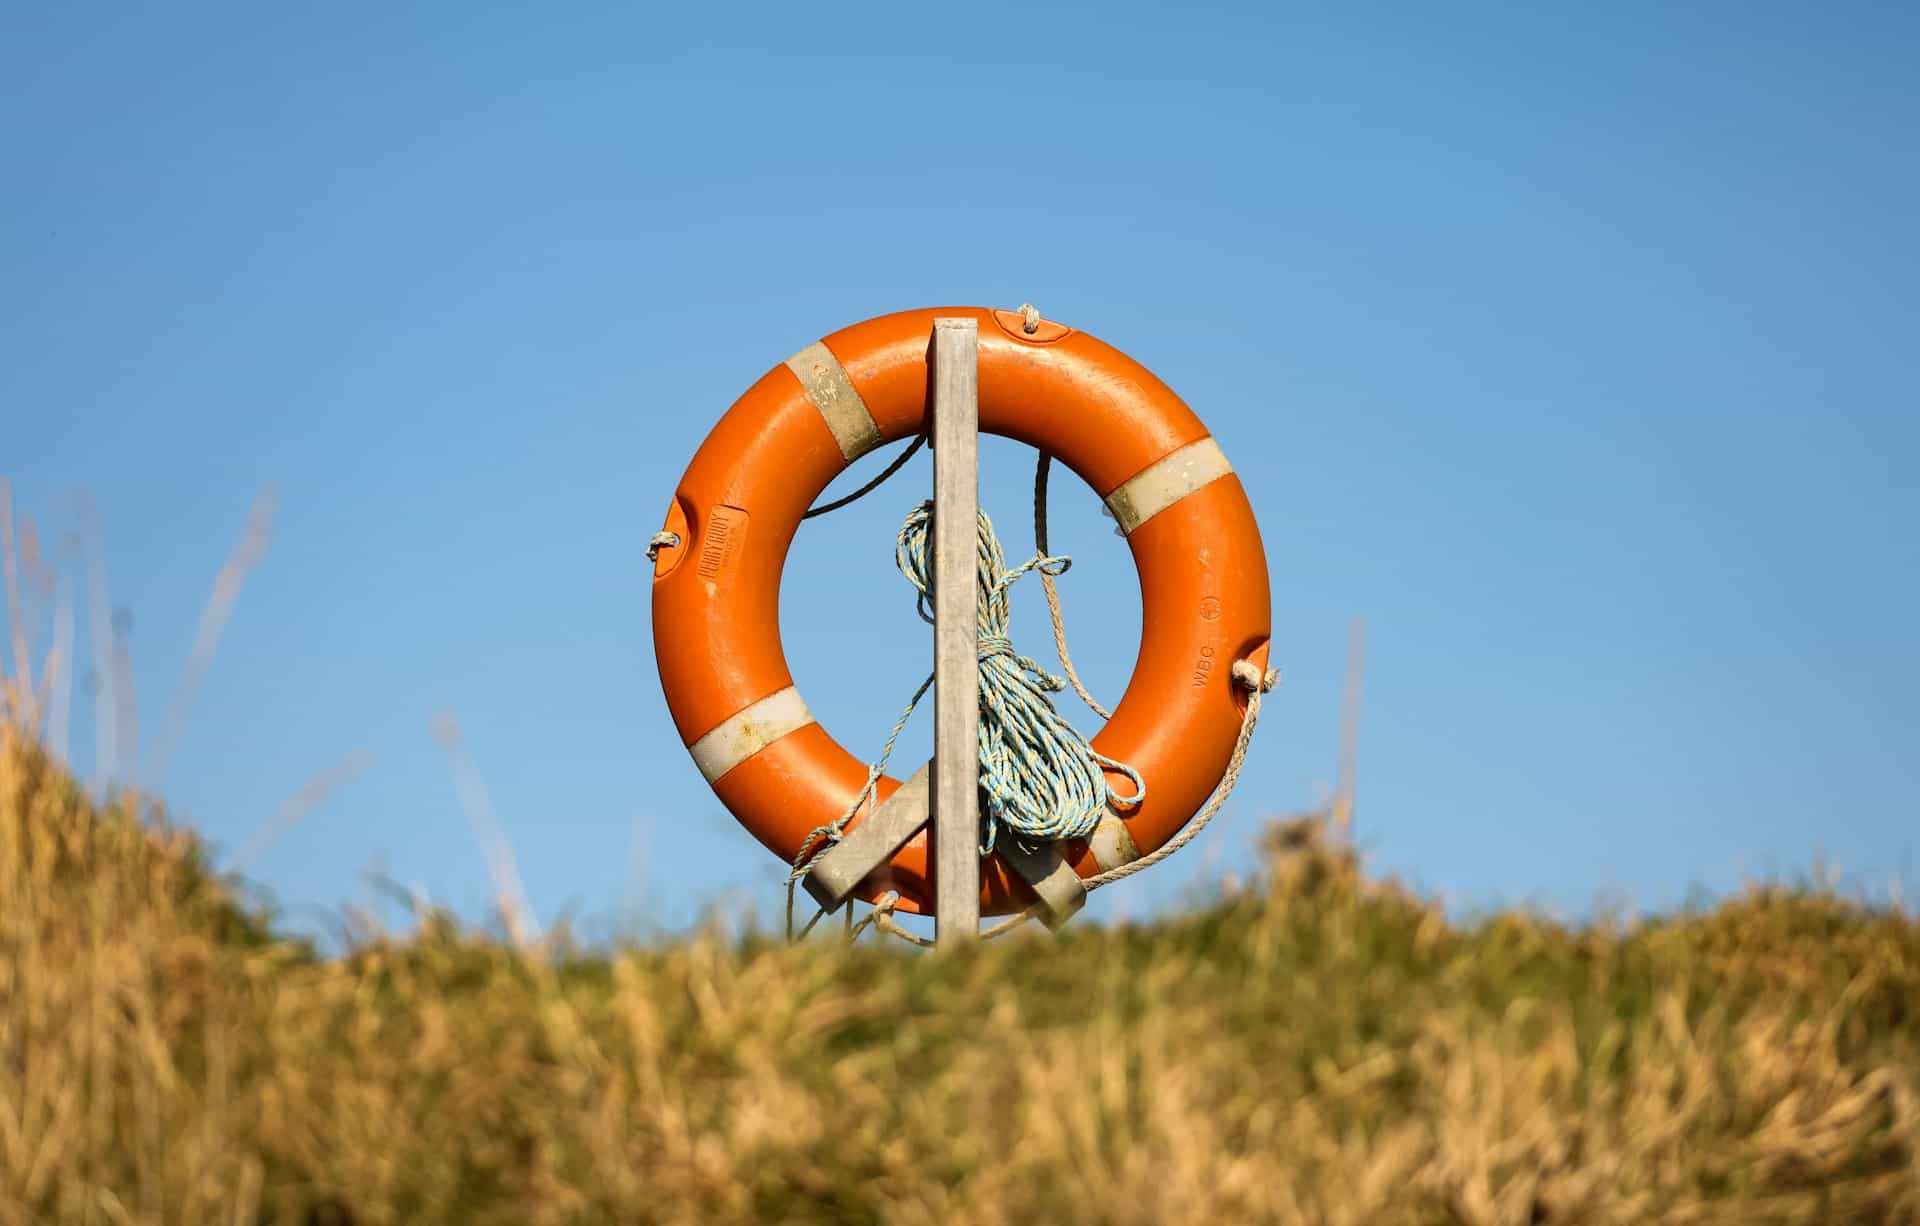 Life saver ring by the coast, with blue sky background